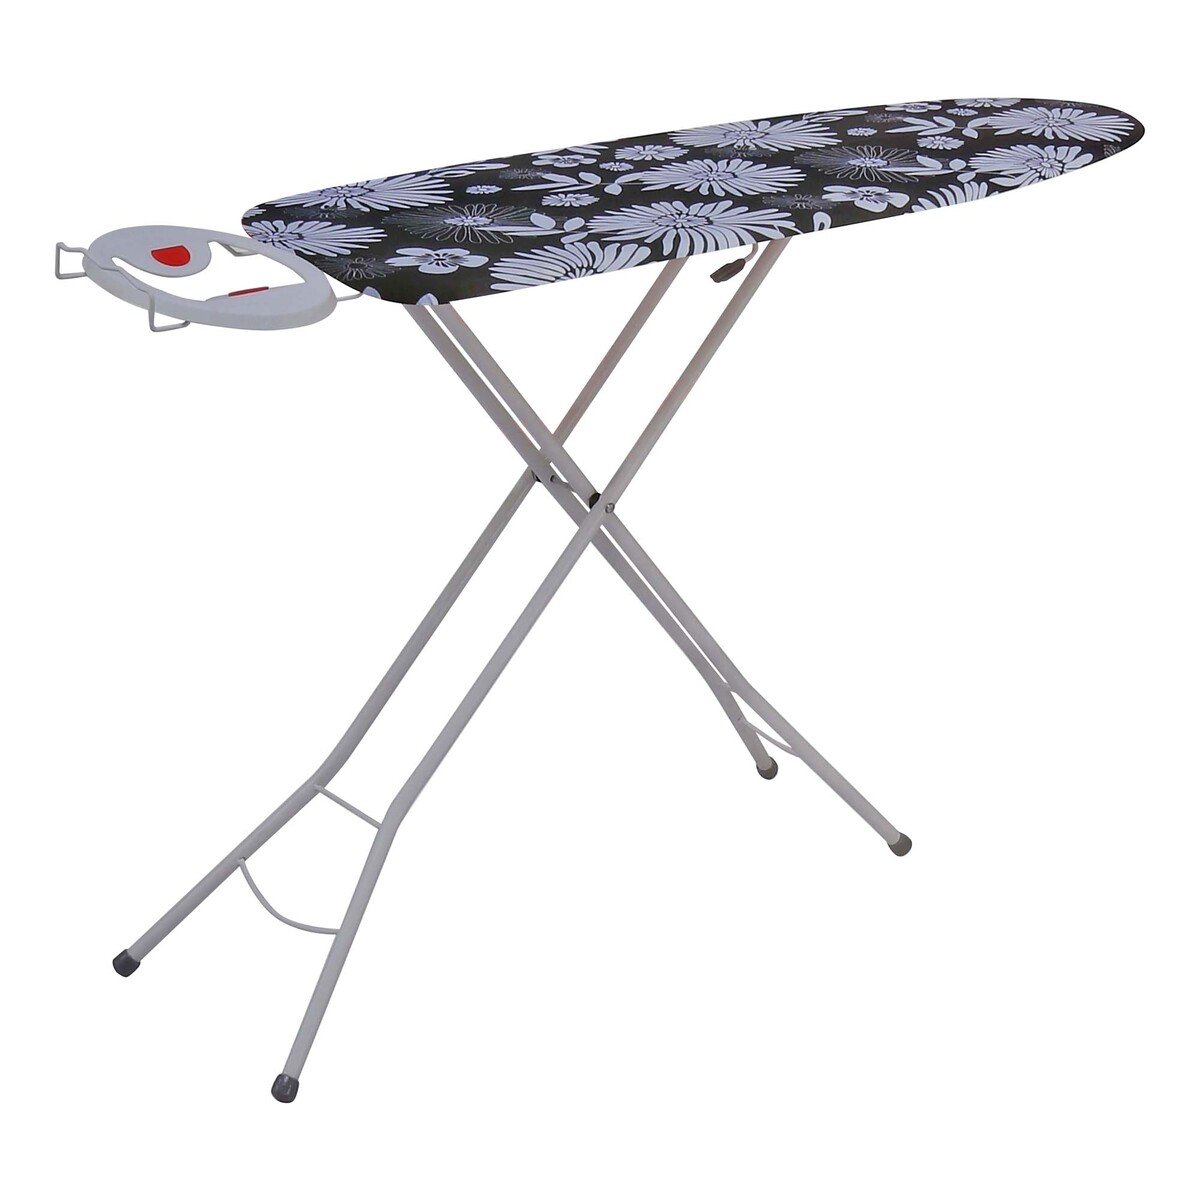 Straight Line Mesh Ironing Board DC648AM Assorted Colors